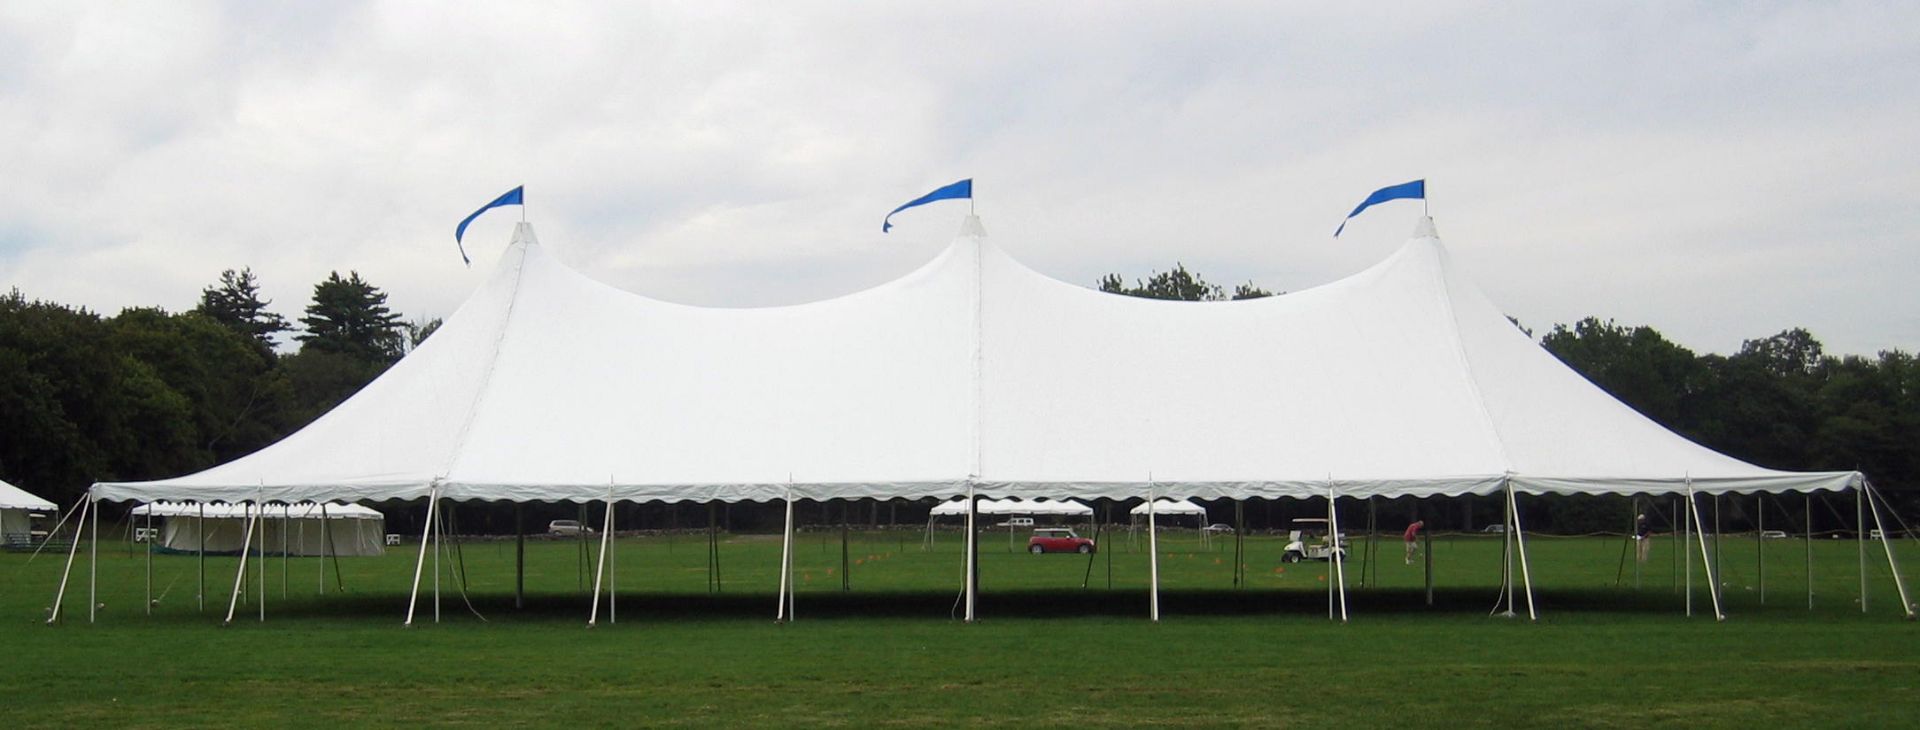 50x70 Century Tent 2-20' ends, 1-30' mid,